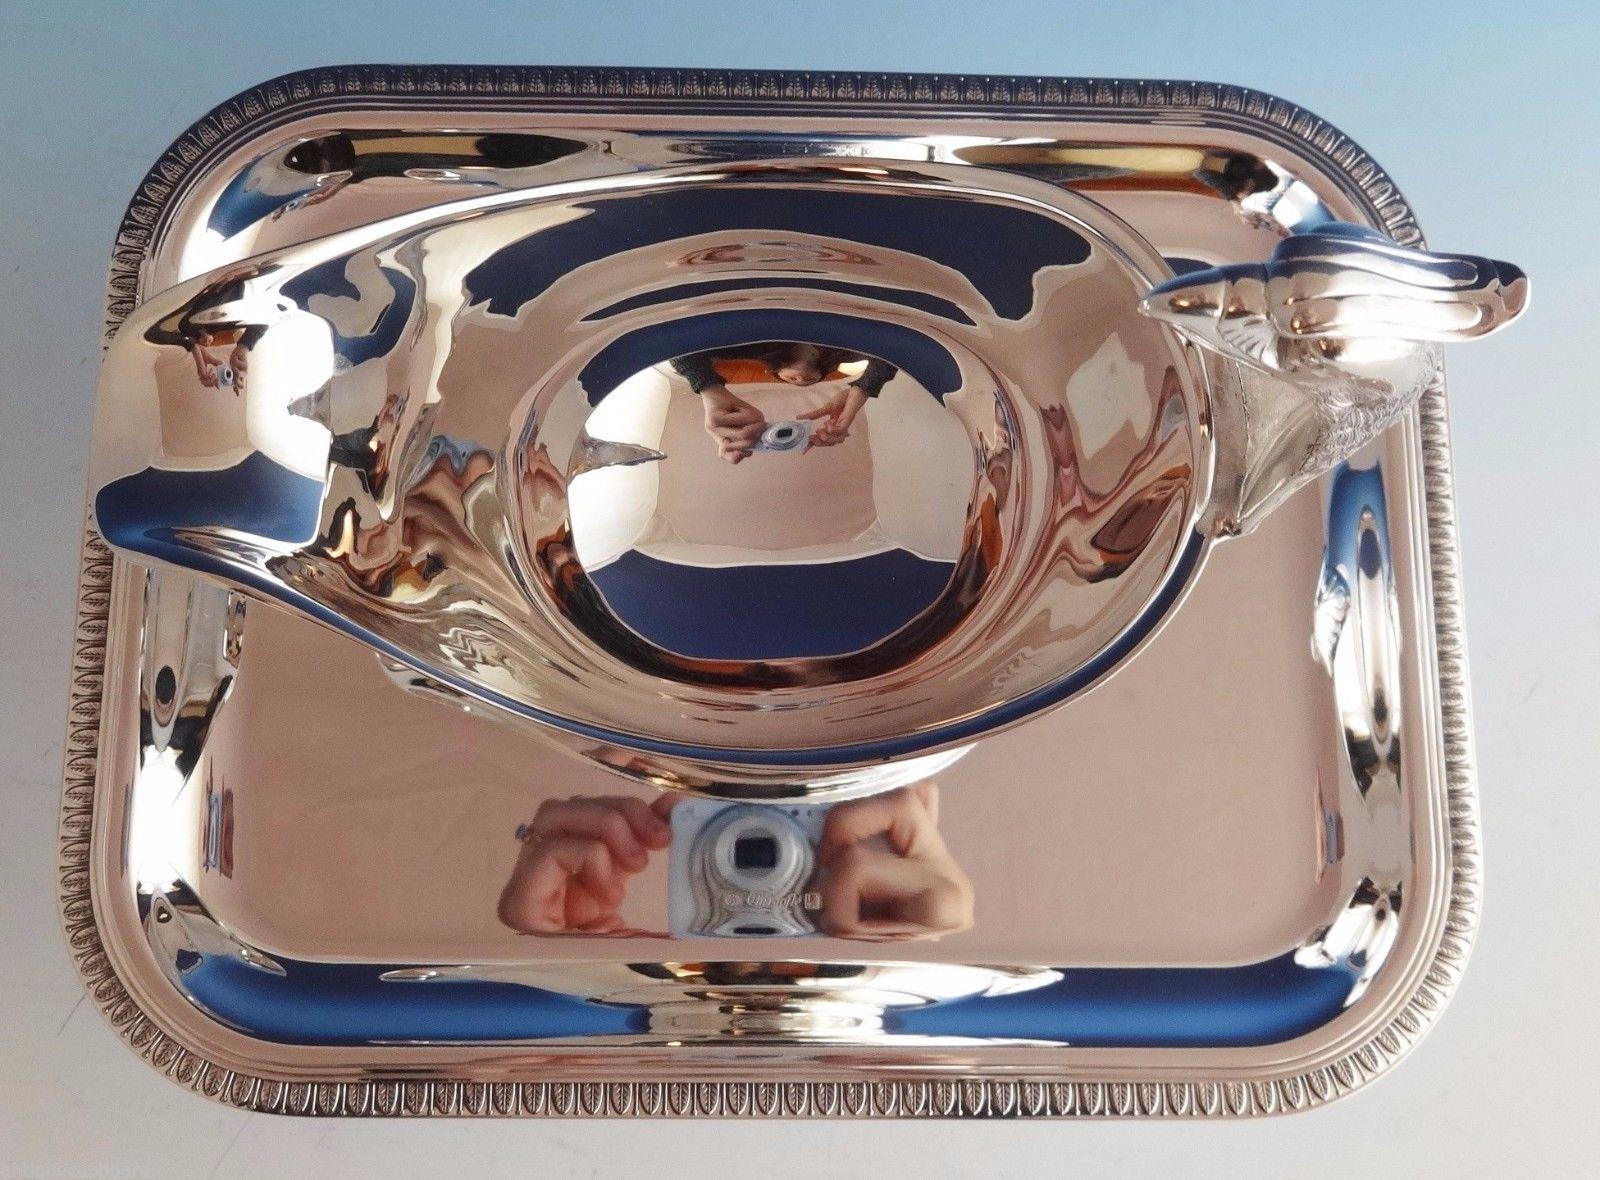 Malmaison by Christofle
Malmaison by Christofle silver plated gravy boat and underplate. The gravy boat features an eagle head handle. New, never used. It includes Christofle box with pouch. The underplate measures 10 1/4 x 8 . The pieces are not